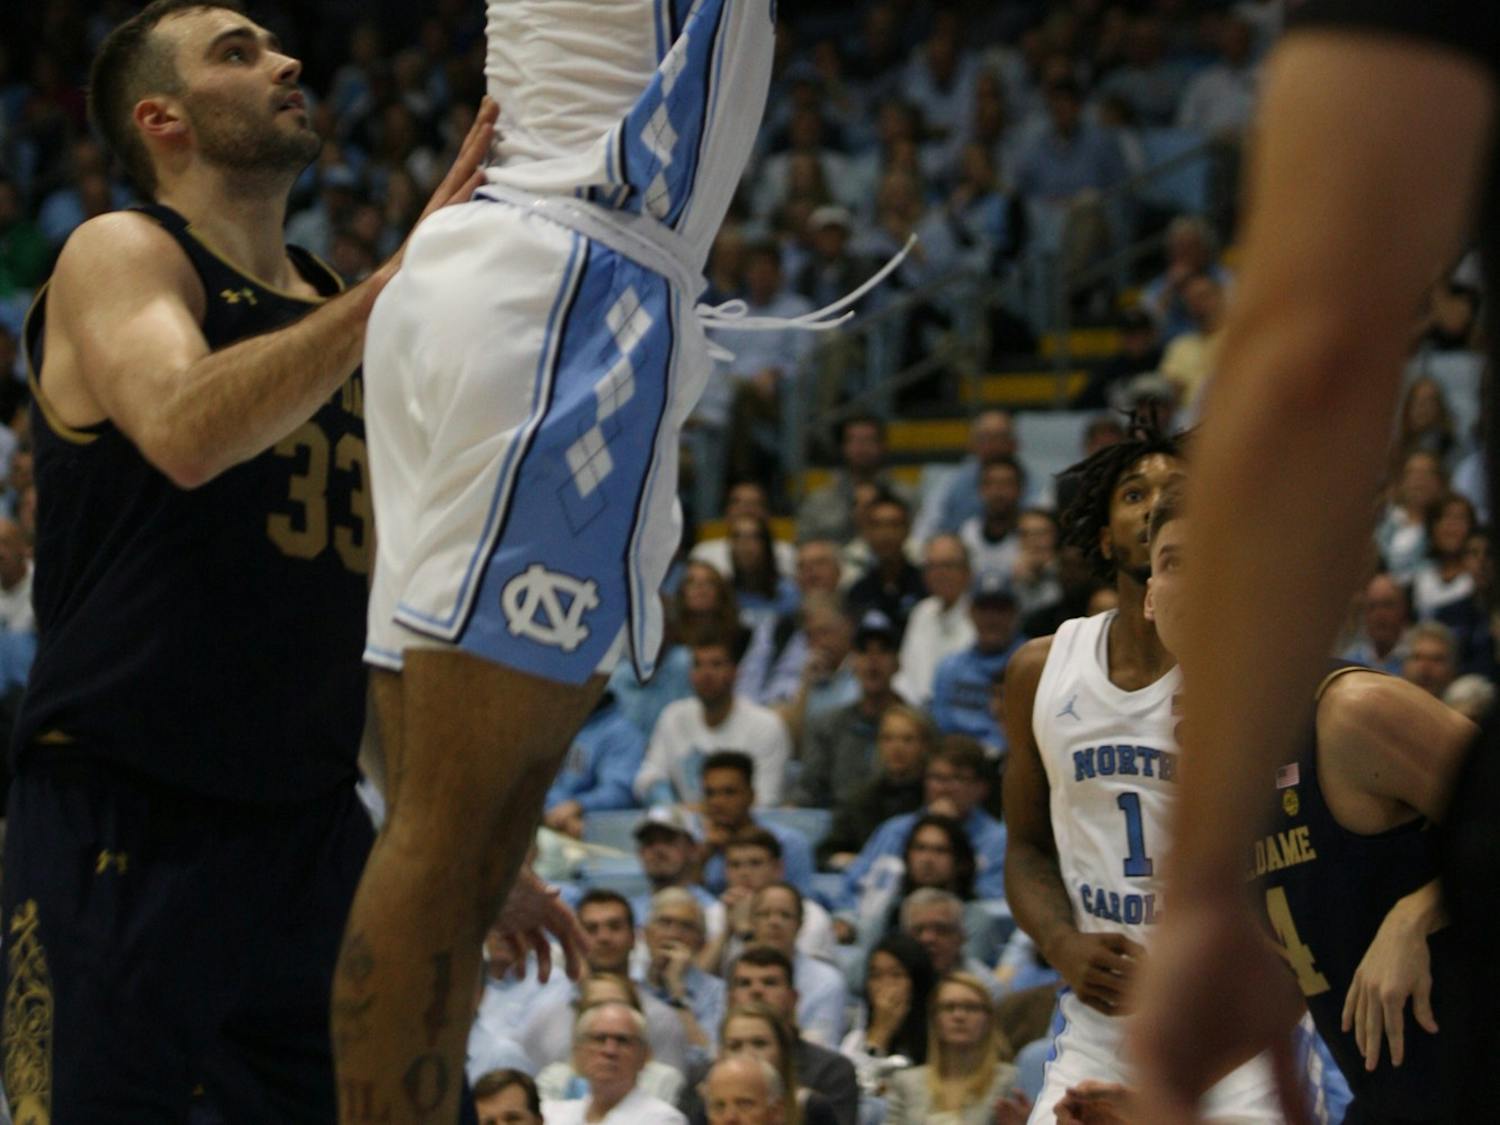 UNC forward Garrison Brooks (15) dunks during the Notre Dame on Wednesday, Nov. 6, 2019 in the Dean E. Smith Center. The Tar Heels beat the Fighting Irish 76-65.